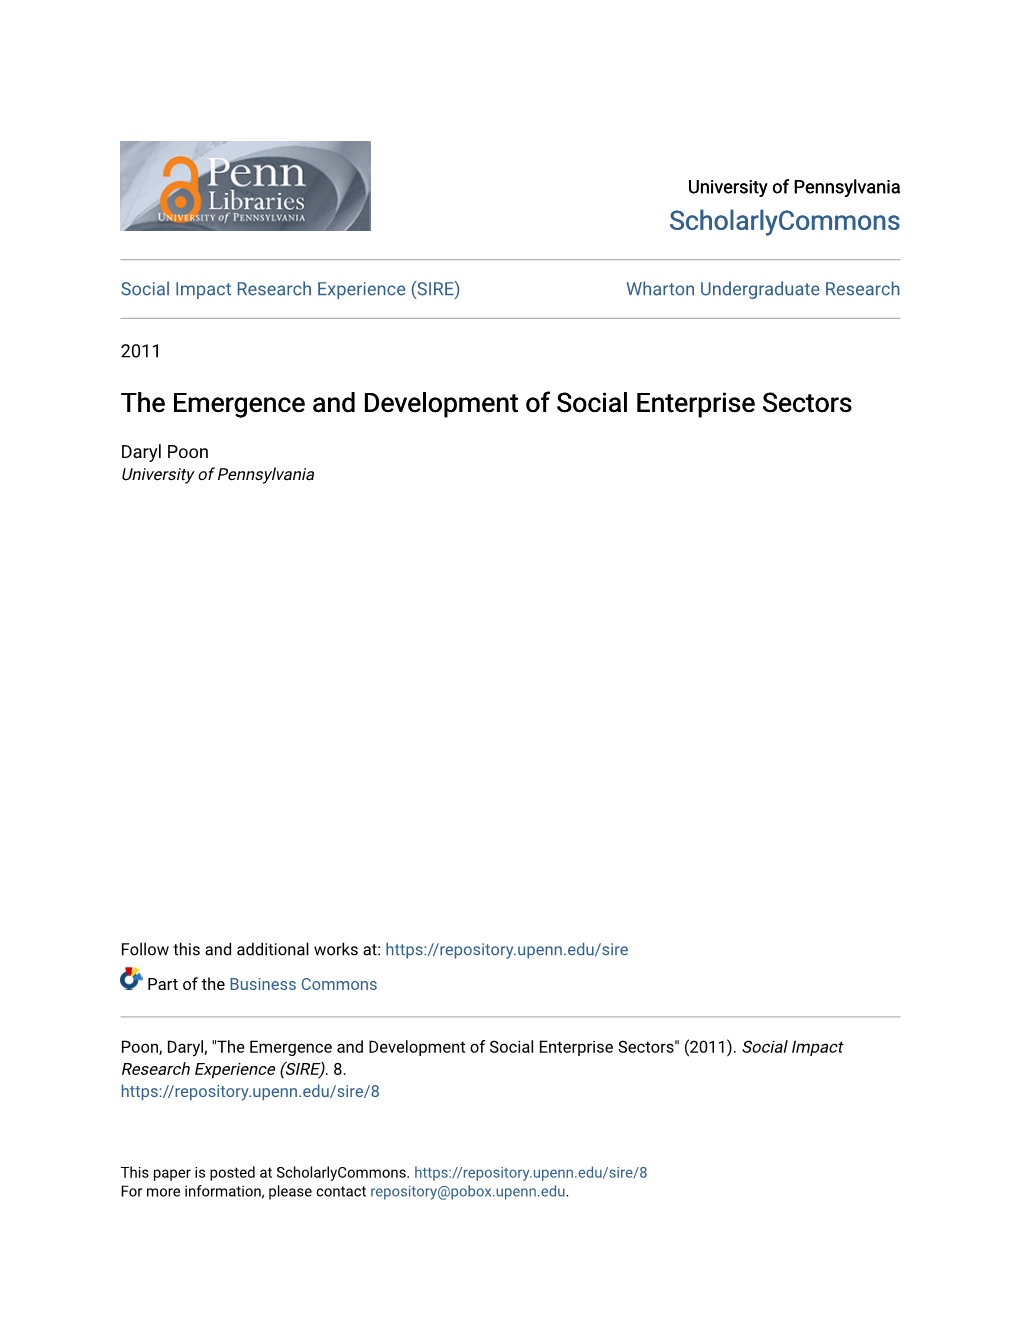 The Emergence and Development of Social Enterprise Sectors